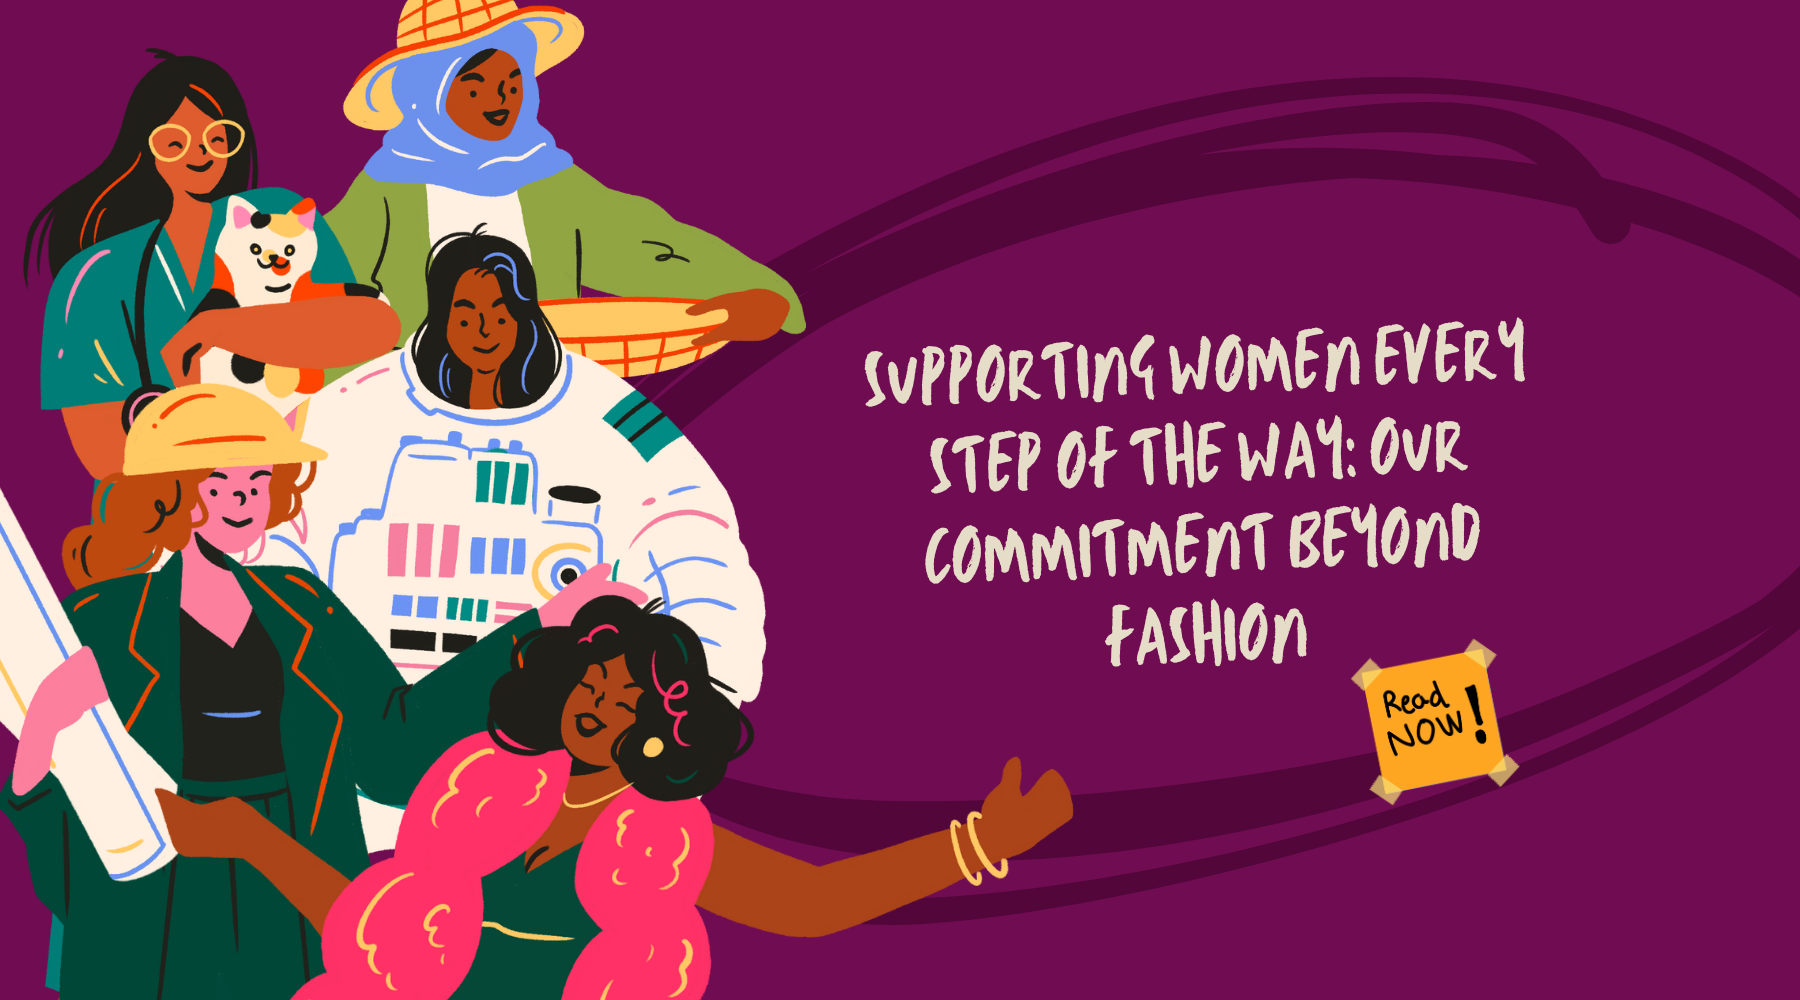 Supporting Women Every Step of the Way: Our Commitment Beyond Fashion